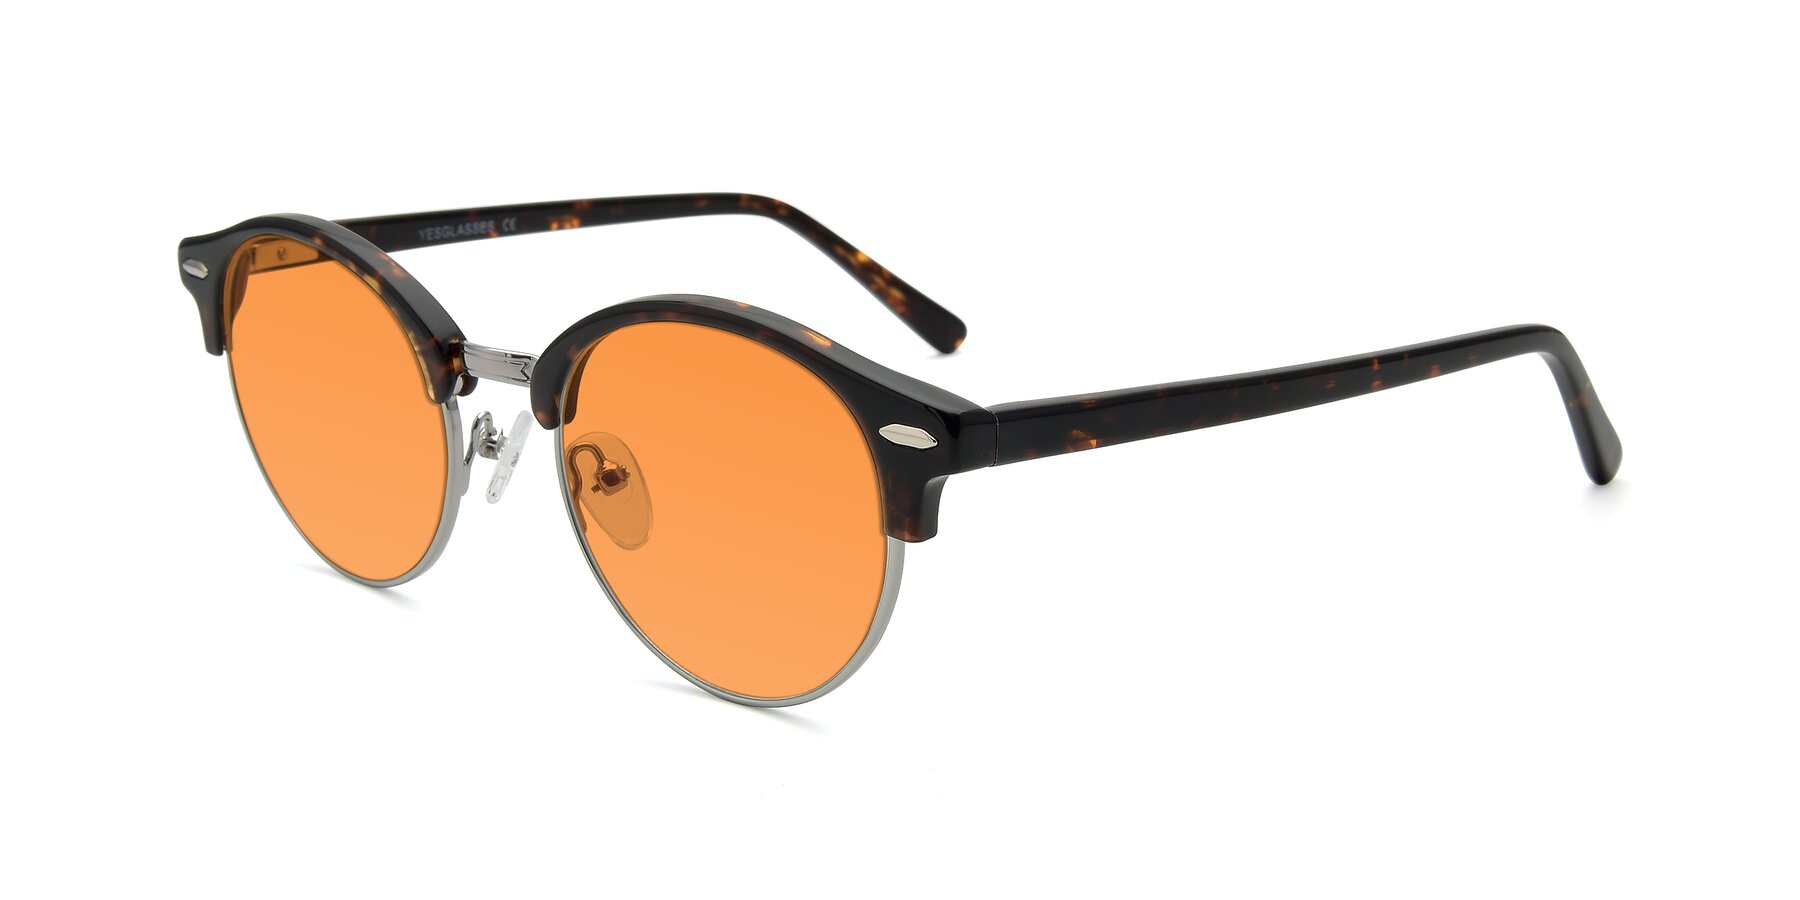 Angle of 17462 in Tortoise-Silver with Orange Tinted Lenses